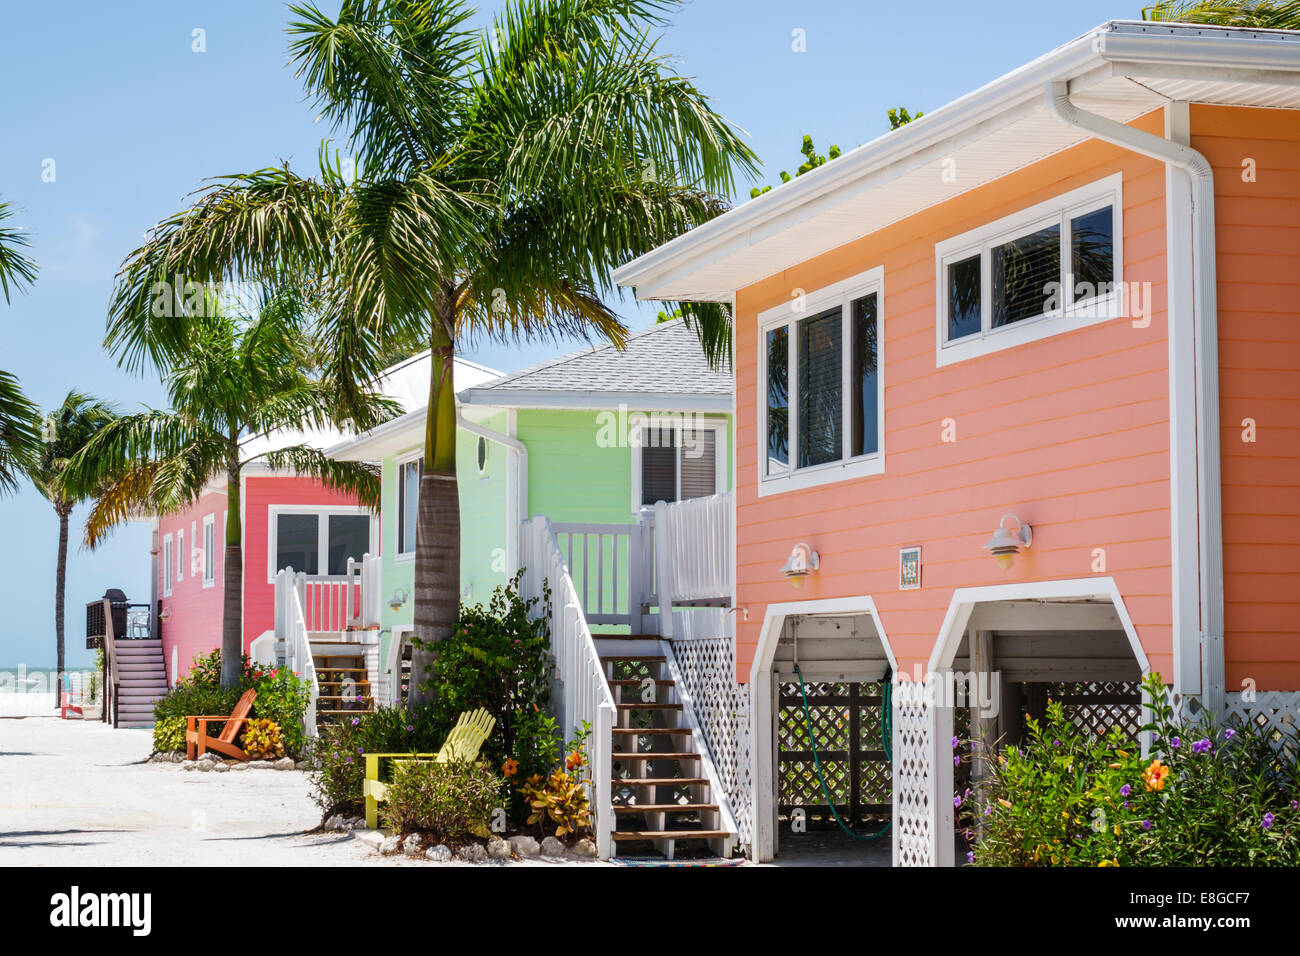 Florida, Fort ft. Myers Beach, Golfo del Messico, Estero Boulevard, Cottages of Paradise Point, affitto, cottage, colorato, FL140501022 Foto Stock